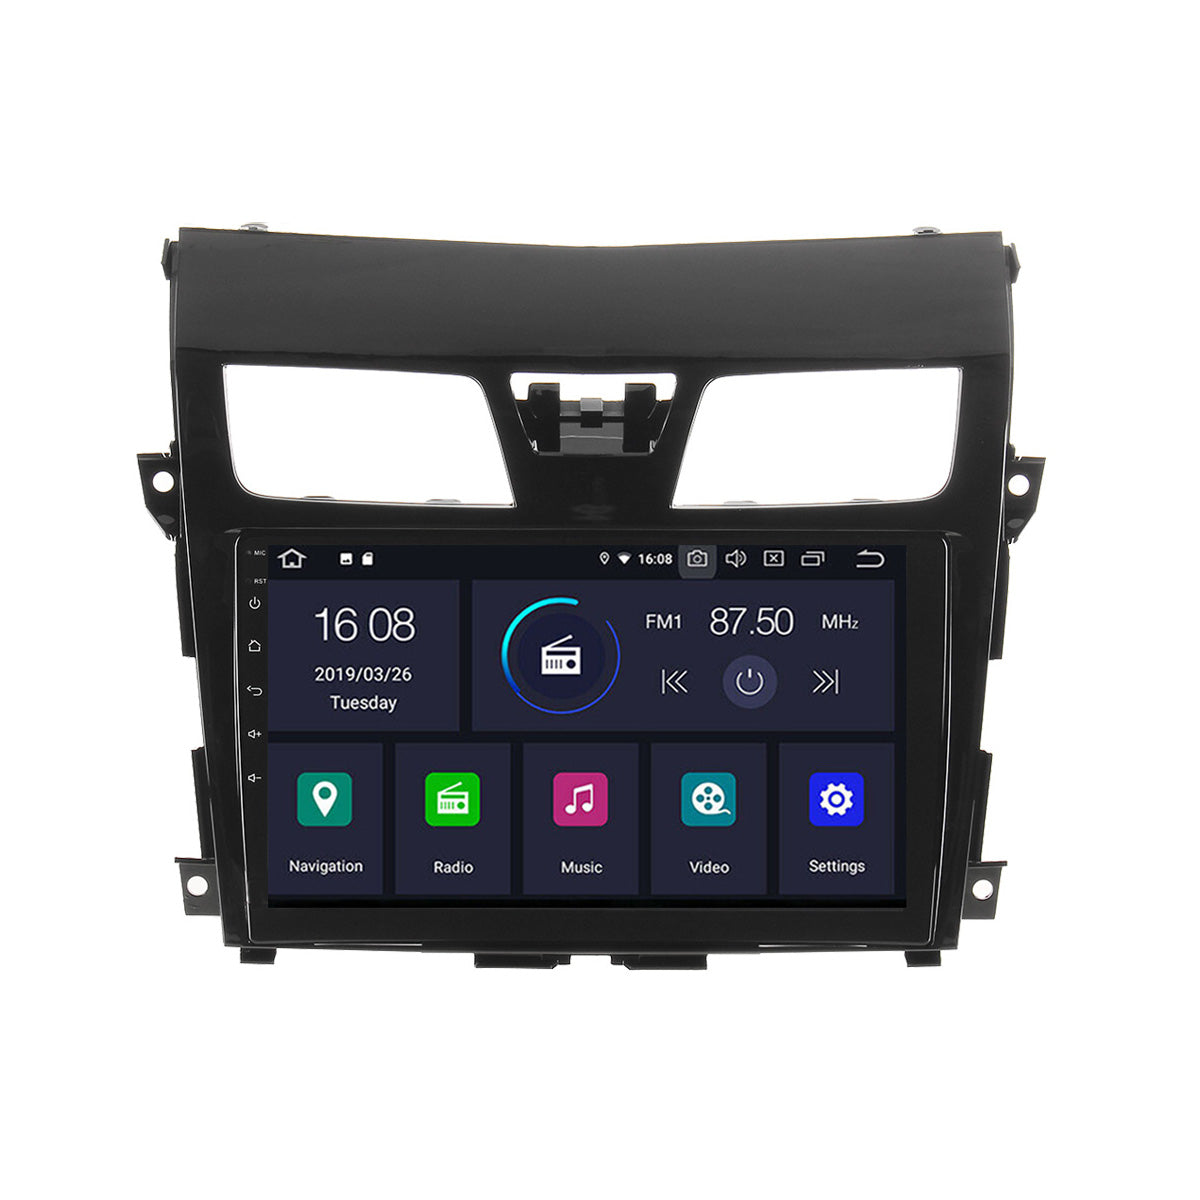 YUEHOO 10.1 Inch 2 DIN for Android 9.0 Car Stereo 4+32G 8 Core MP5 Player GPS WIFI 4G FM AM RDS Radio for Nissan Altima Teana 2013-2018 - Auto GoShop